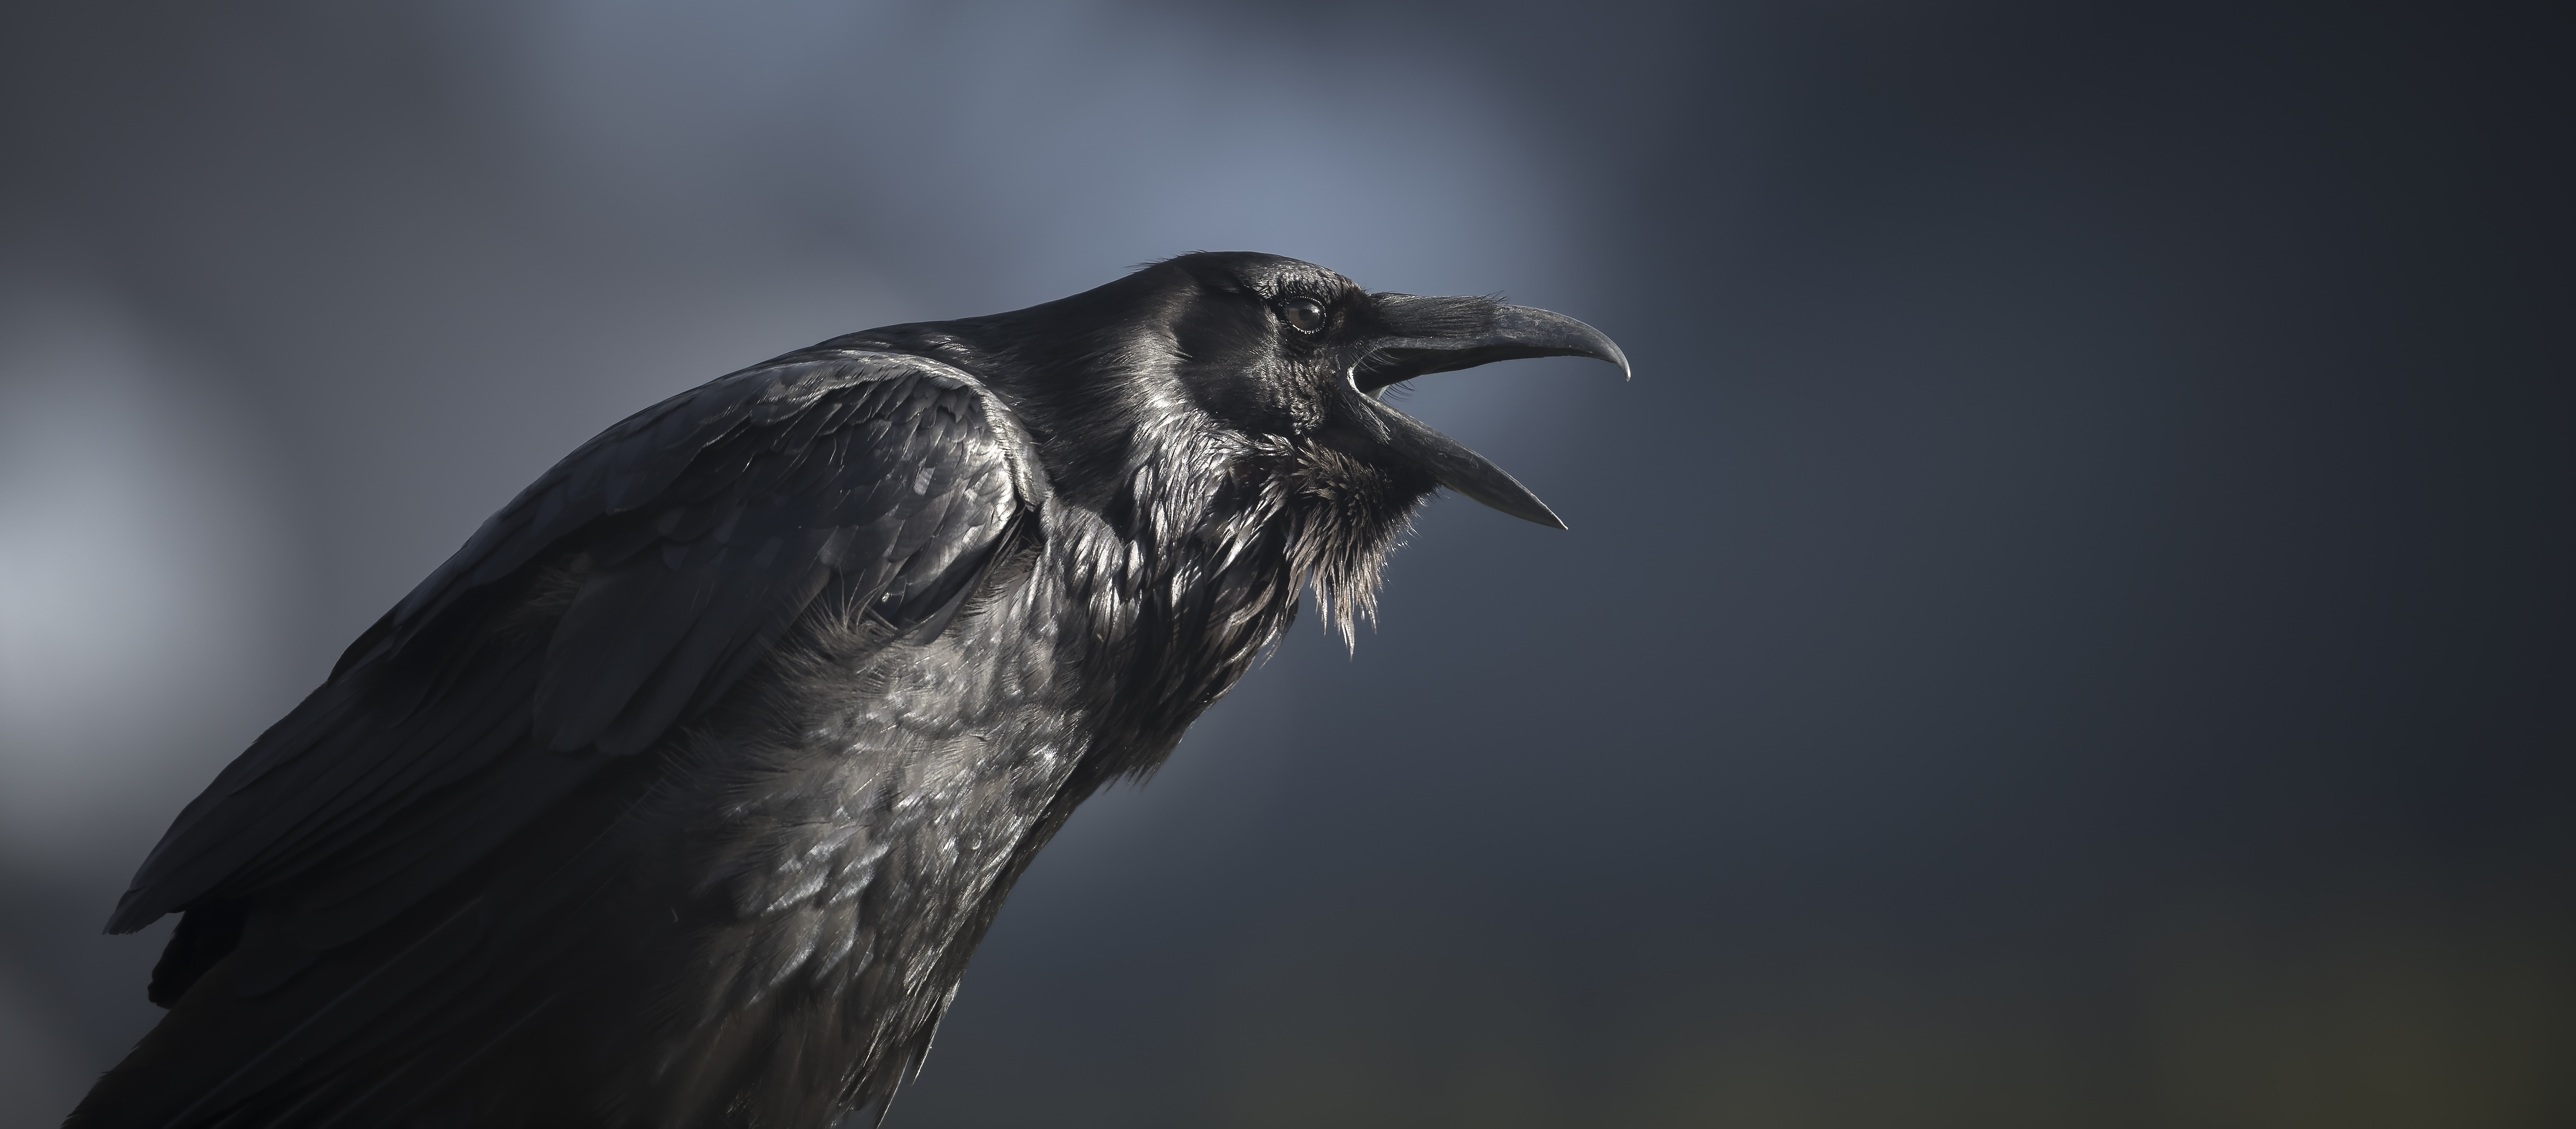 A raven calling out. | Source: Getty Images